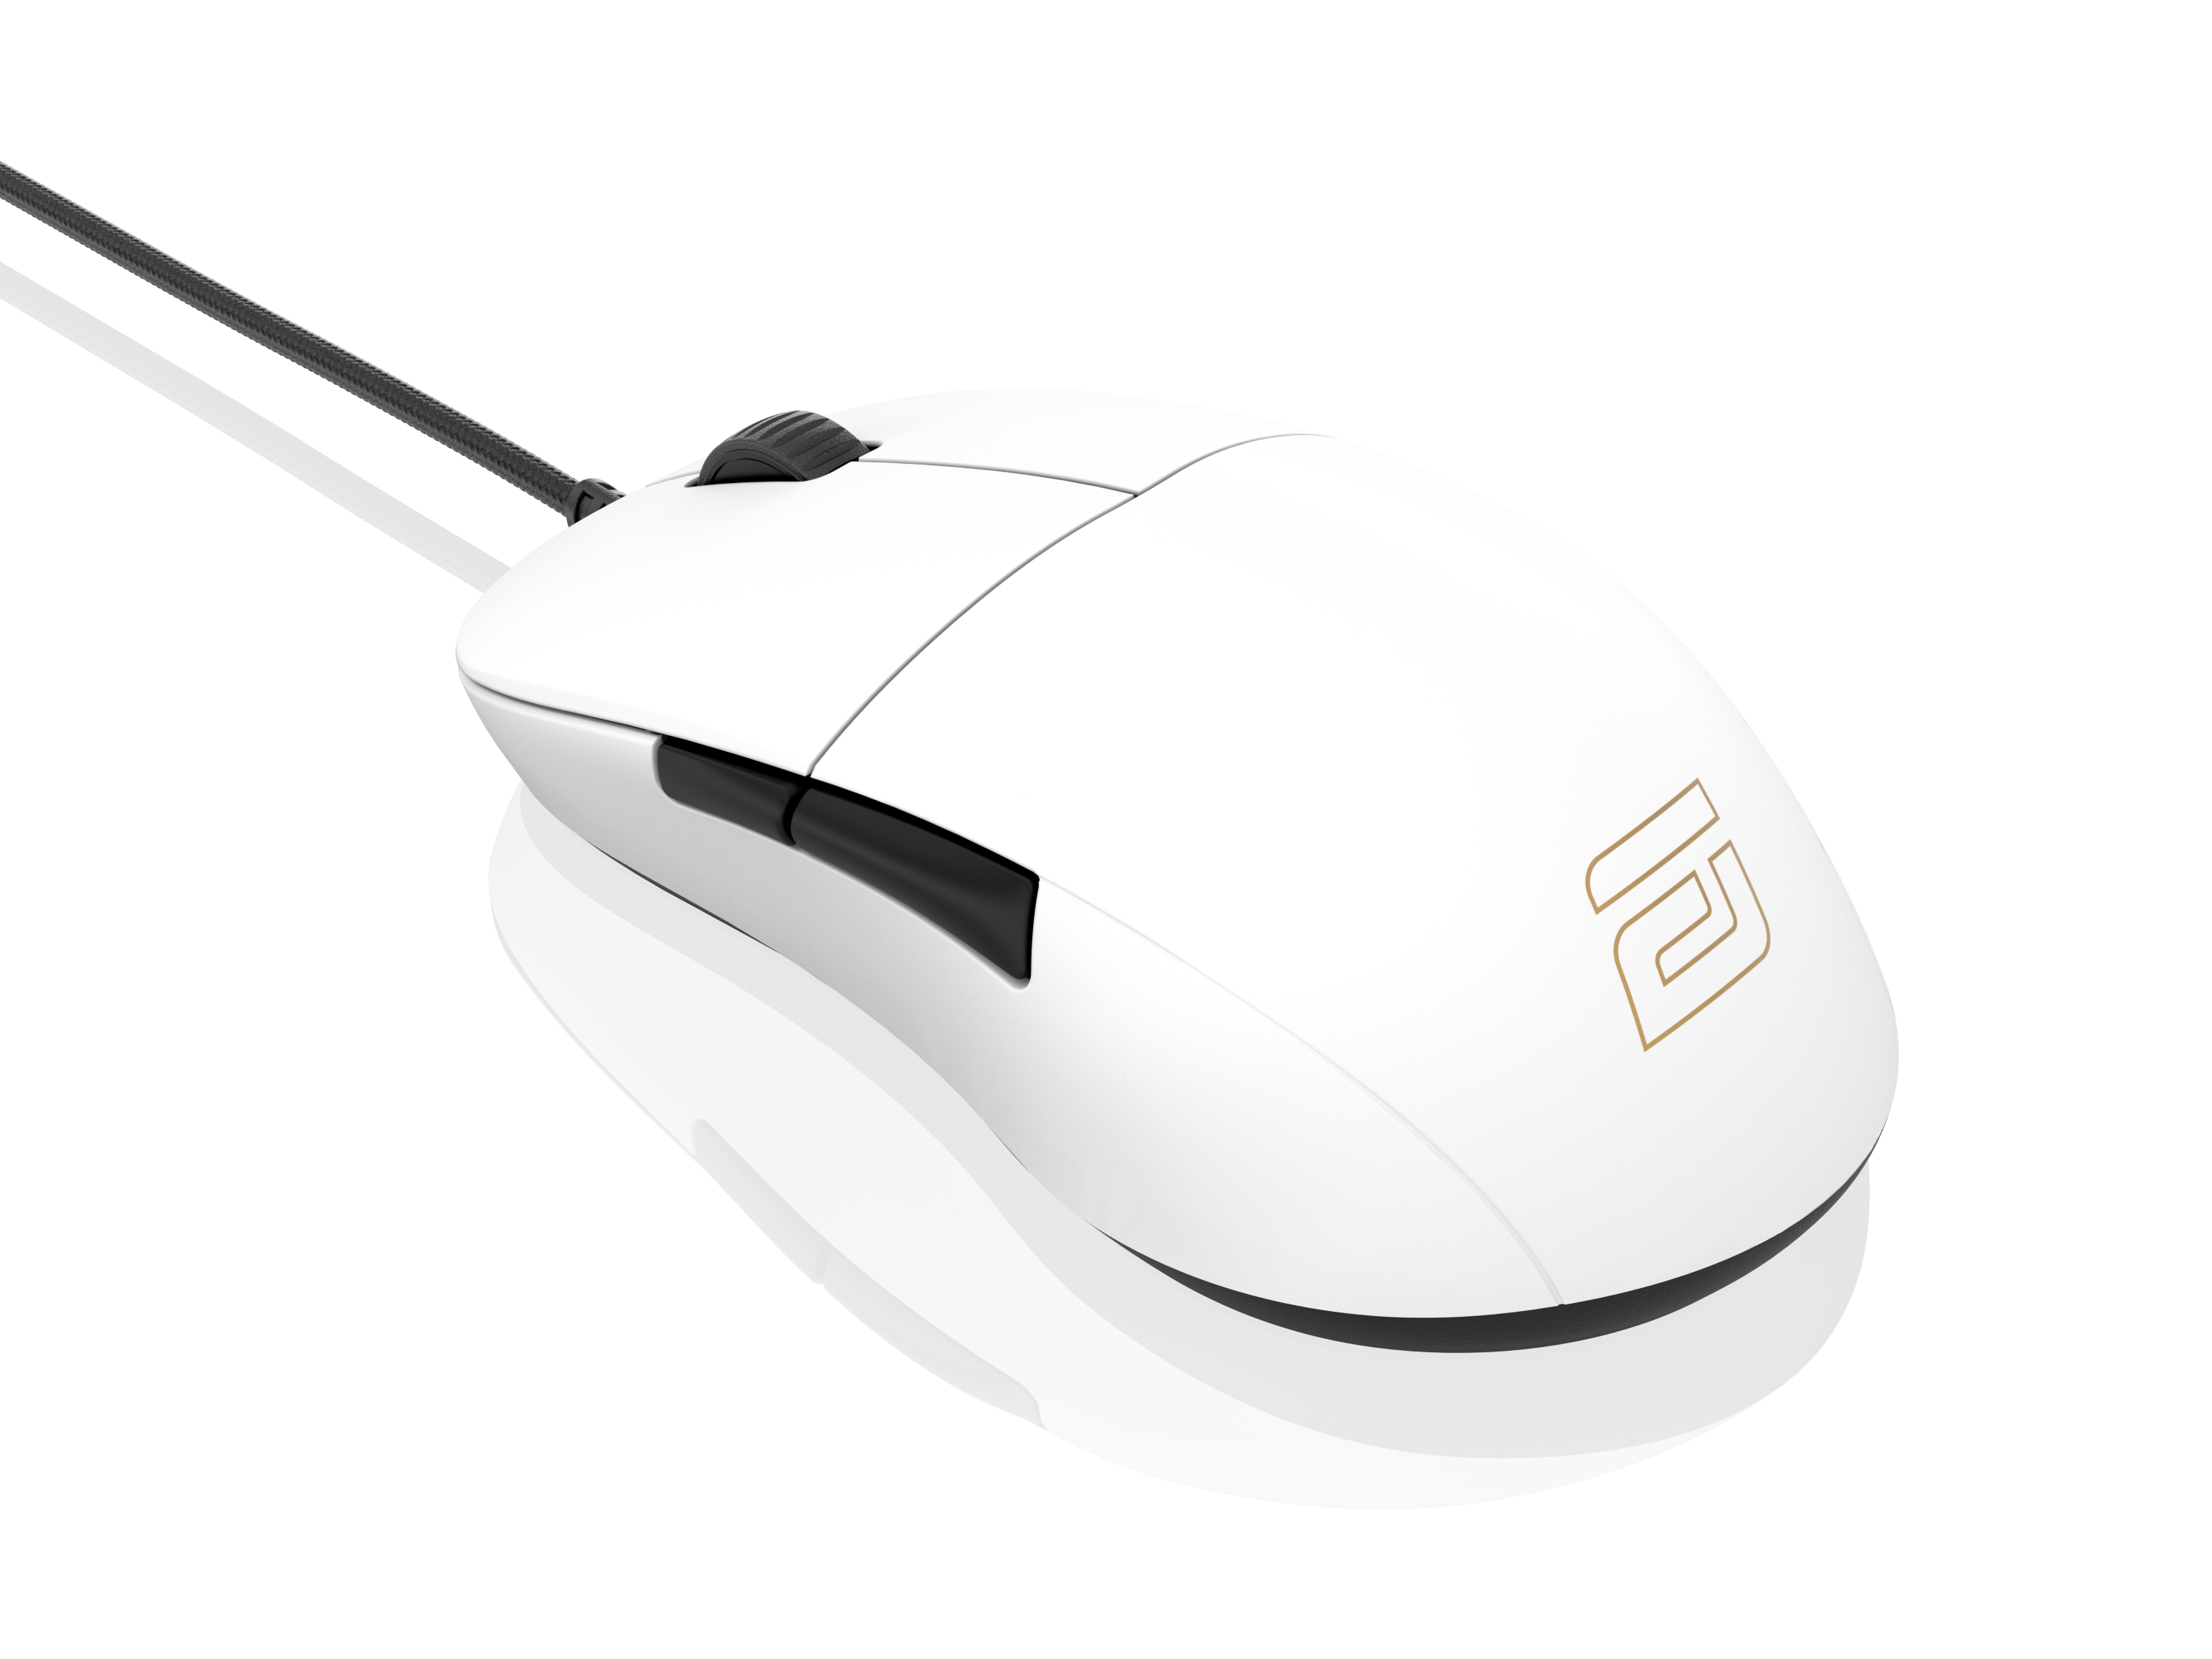 Advanced switches and technology XM1r Gaming Mouse